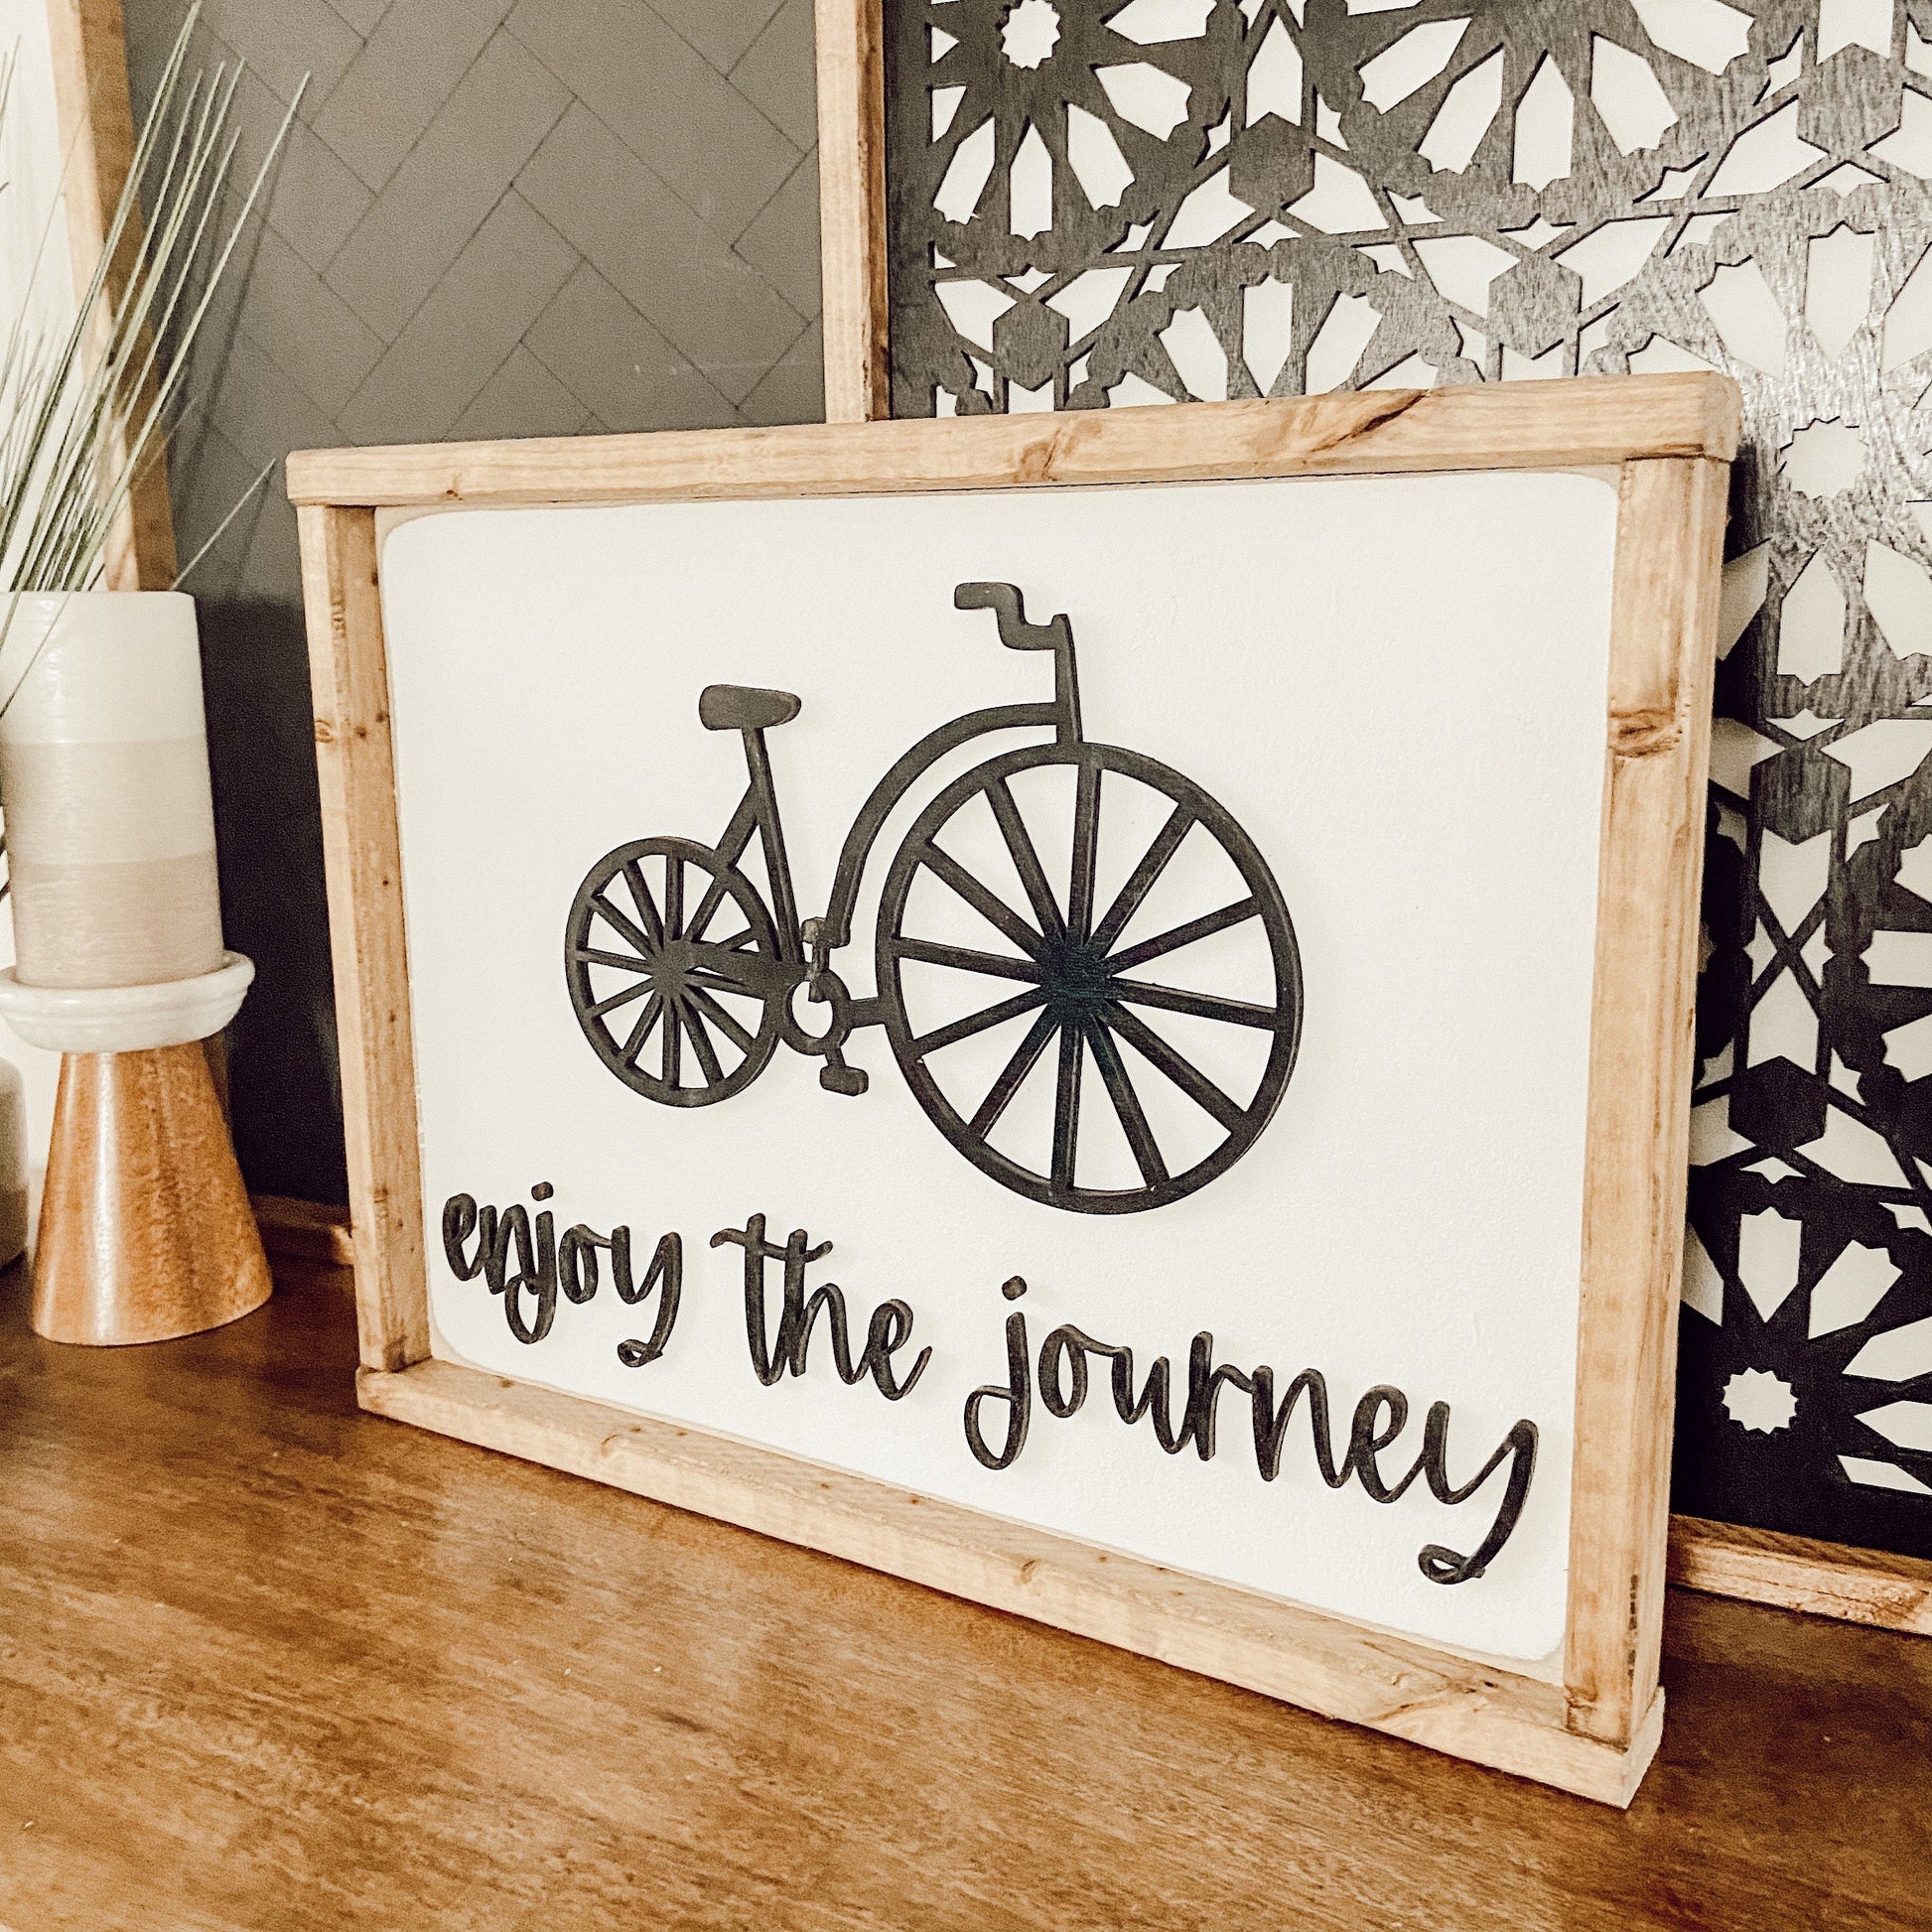 enjoy the journey sign [FREE SHIPPING!]